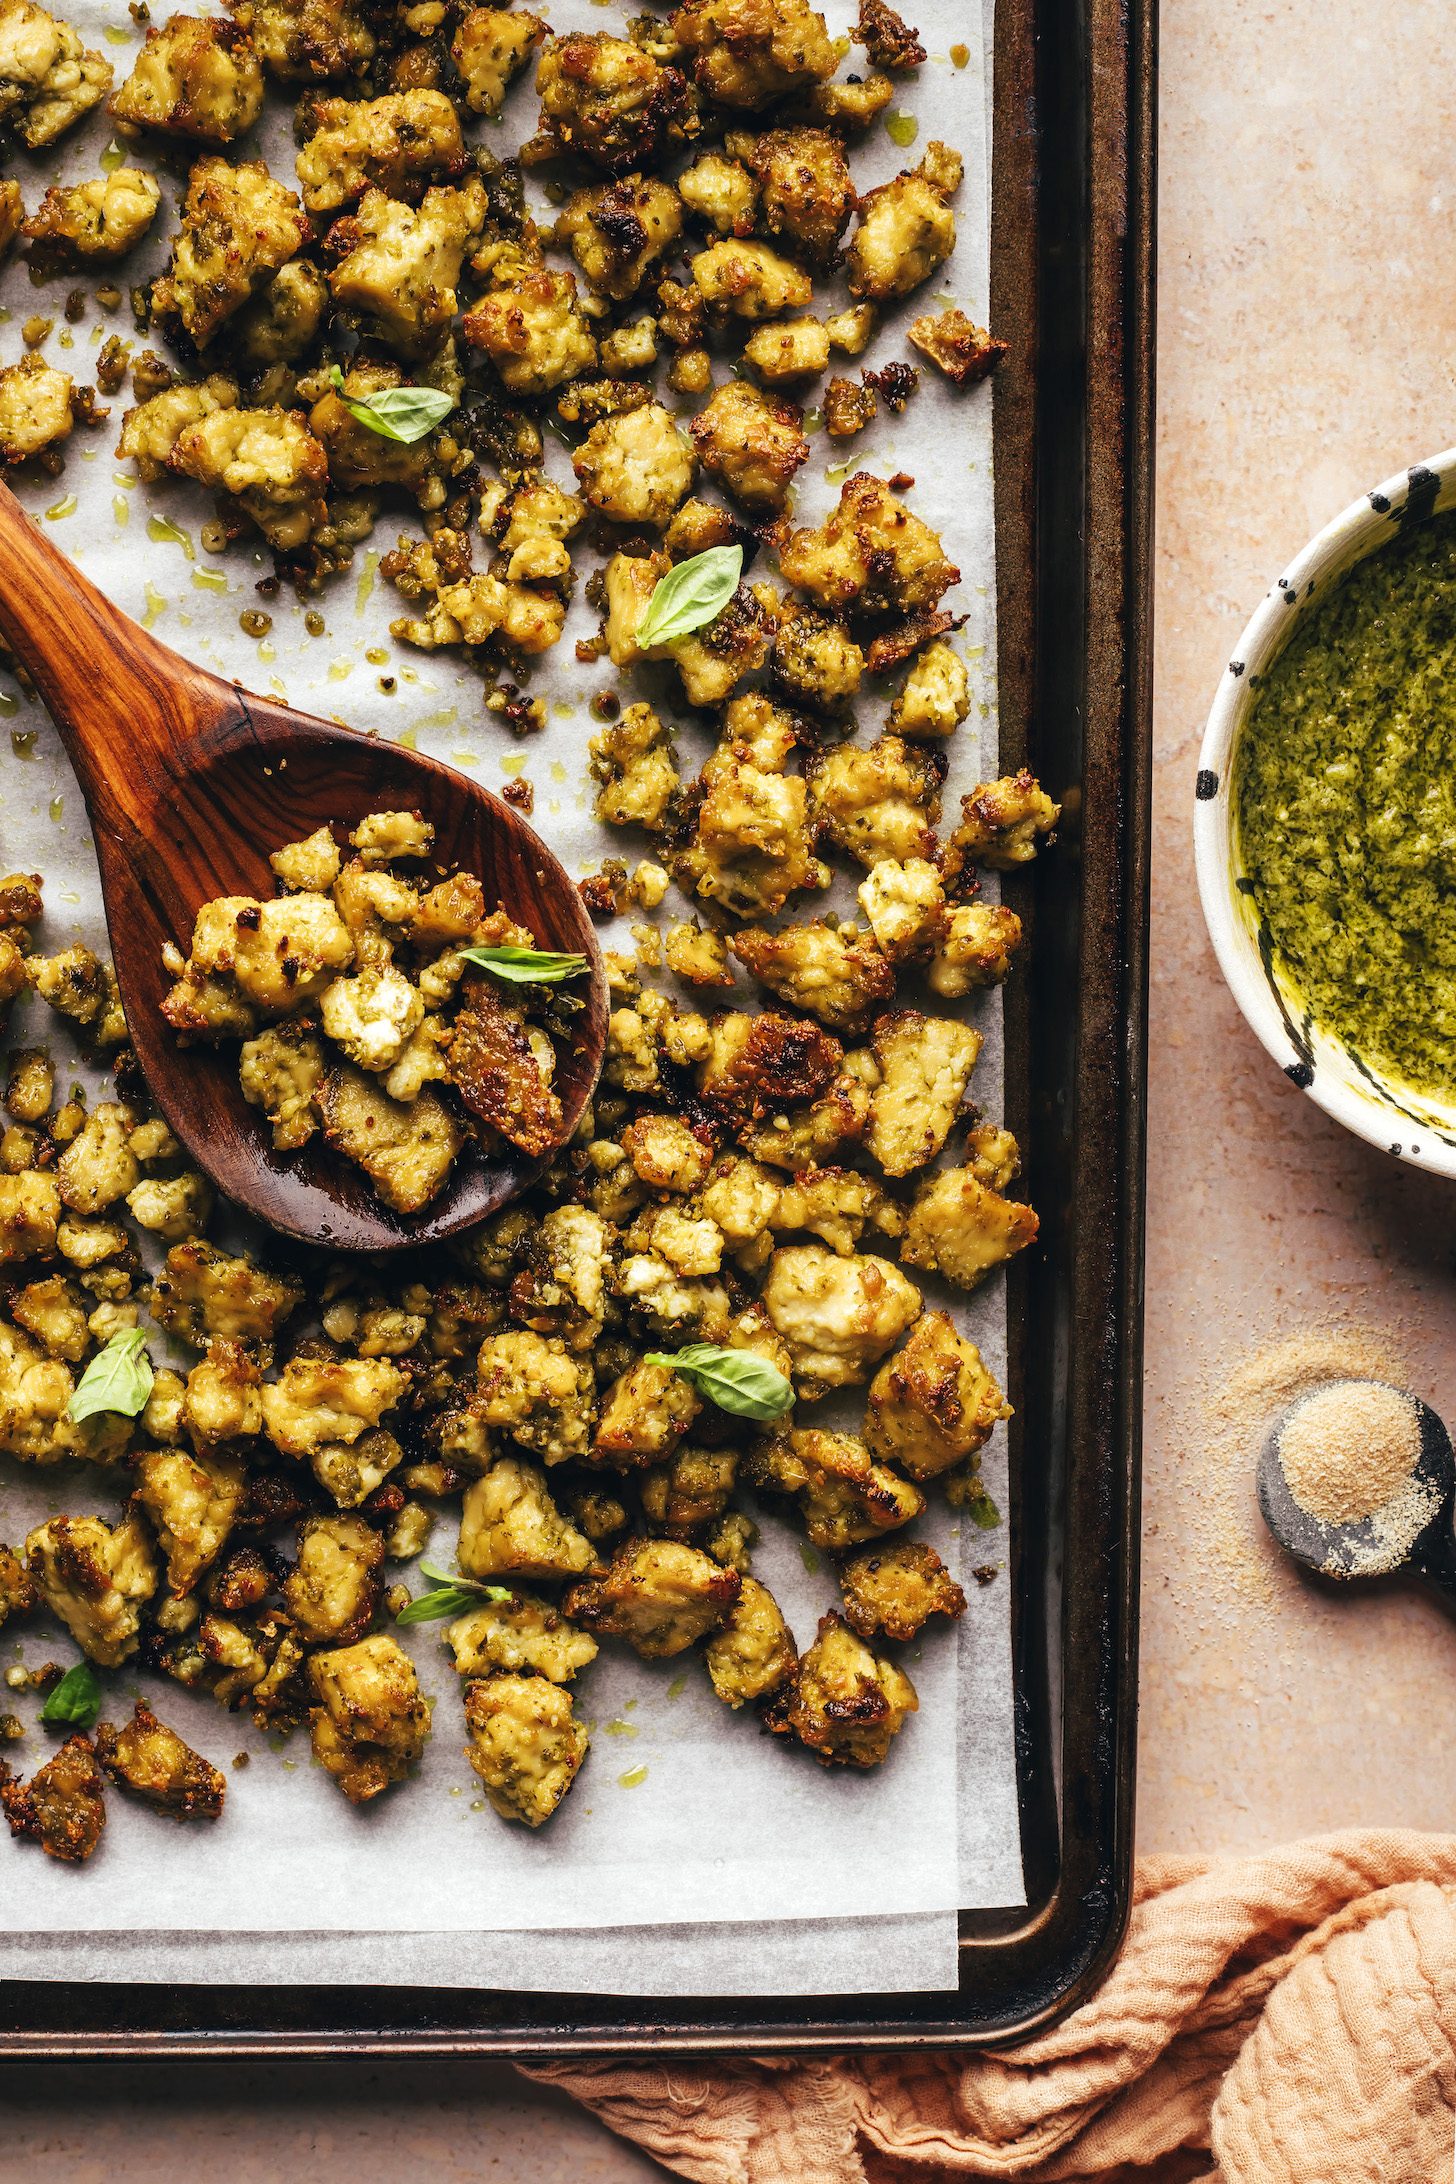 Pesto next to a parchment-lined baking sheet of crispy baked tofu with pesto